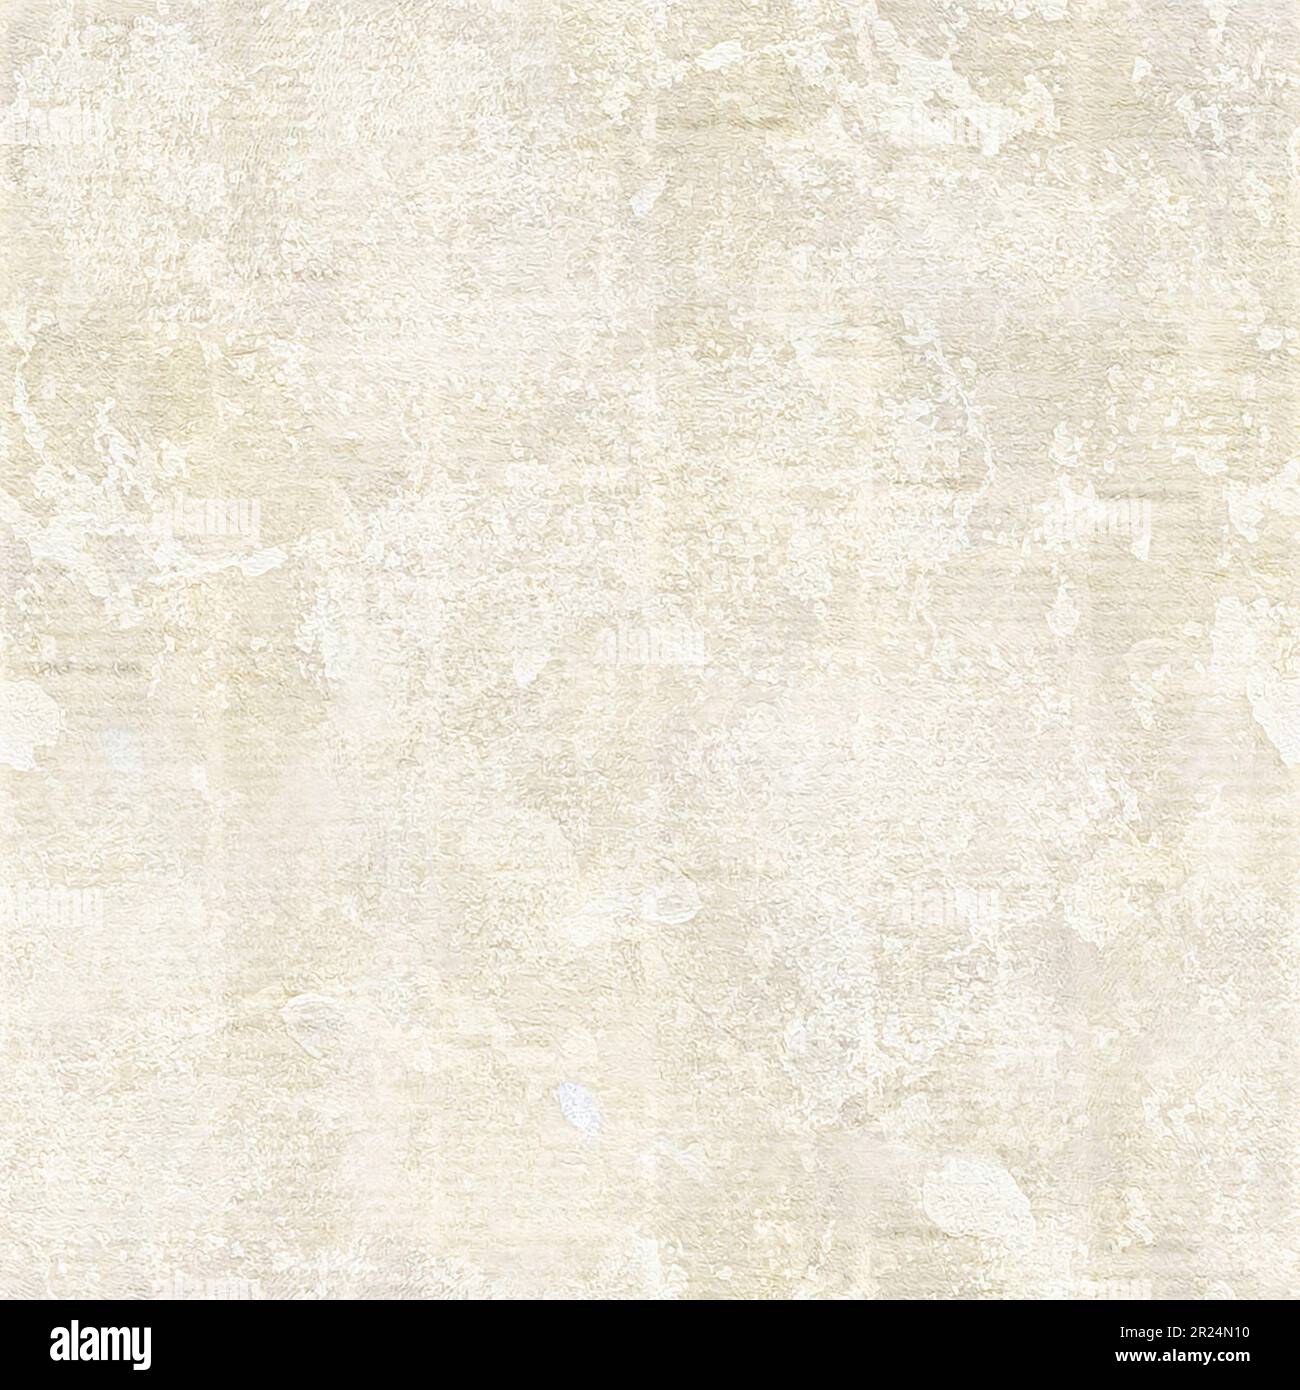 Newspaper paper background with space for text. Old grunge